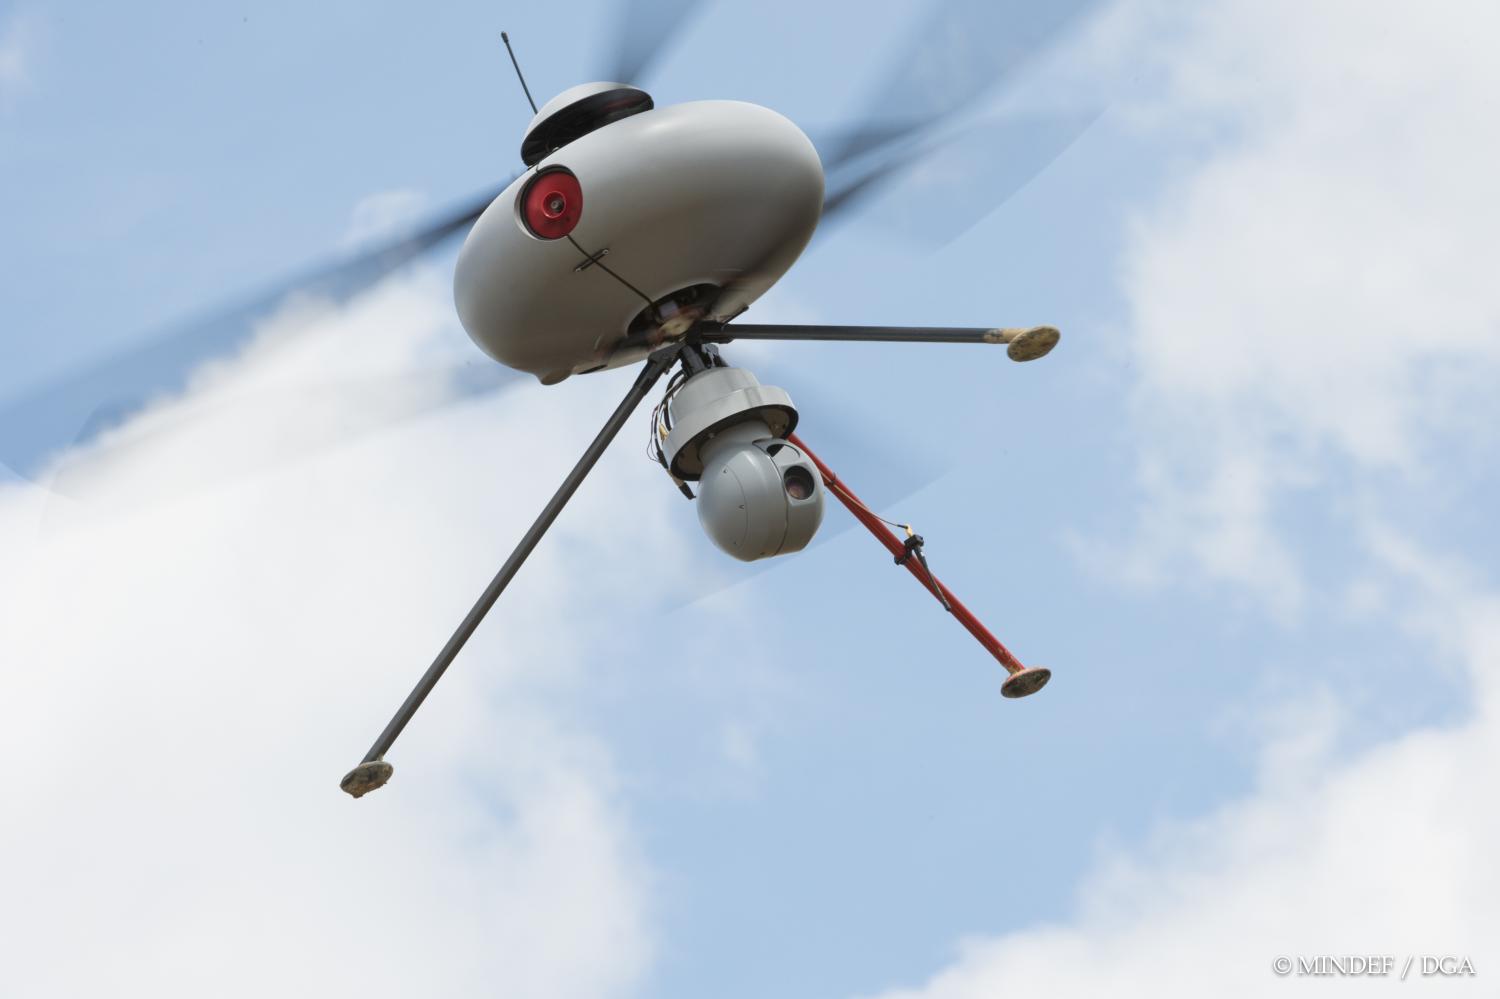 T180-5TH Drone Hunting Drone Promises to Find Malicious UAV Operators